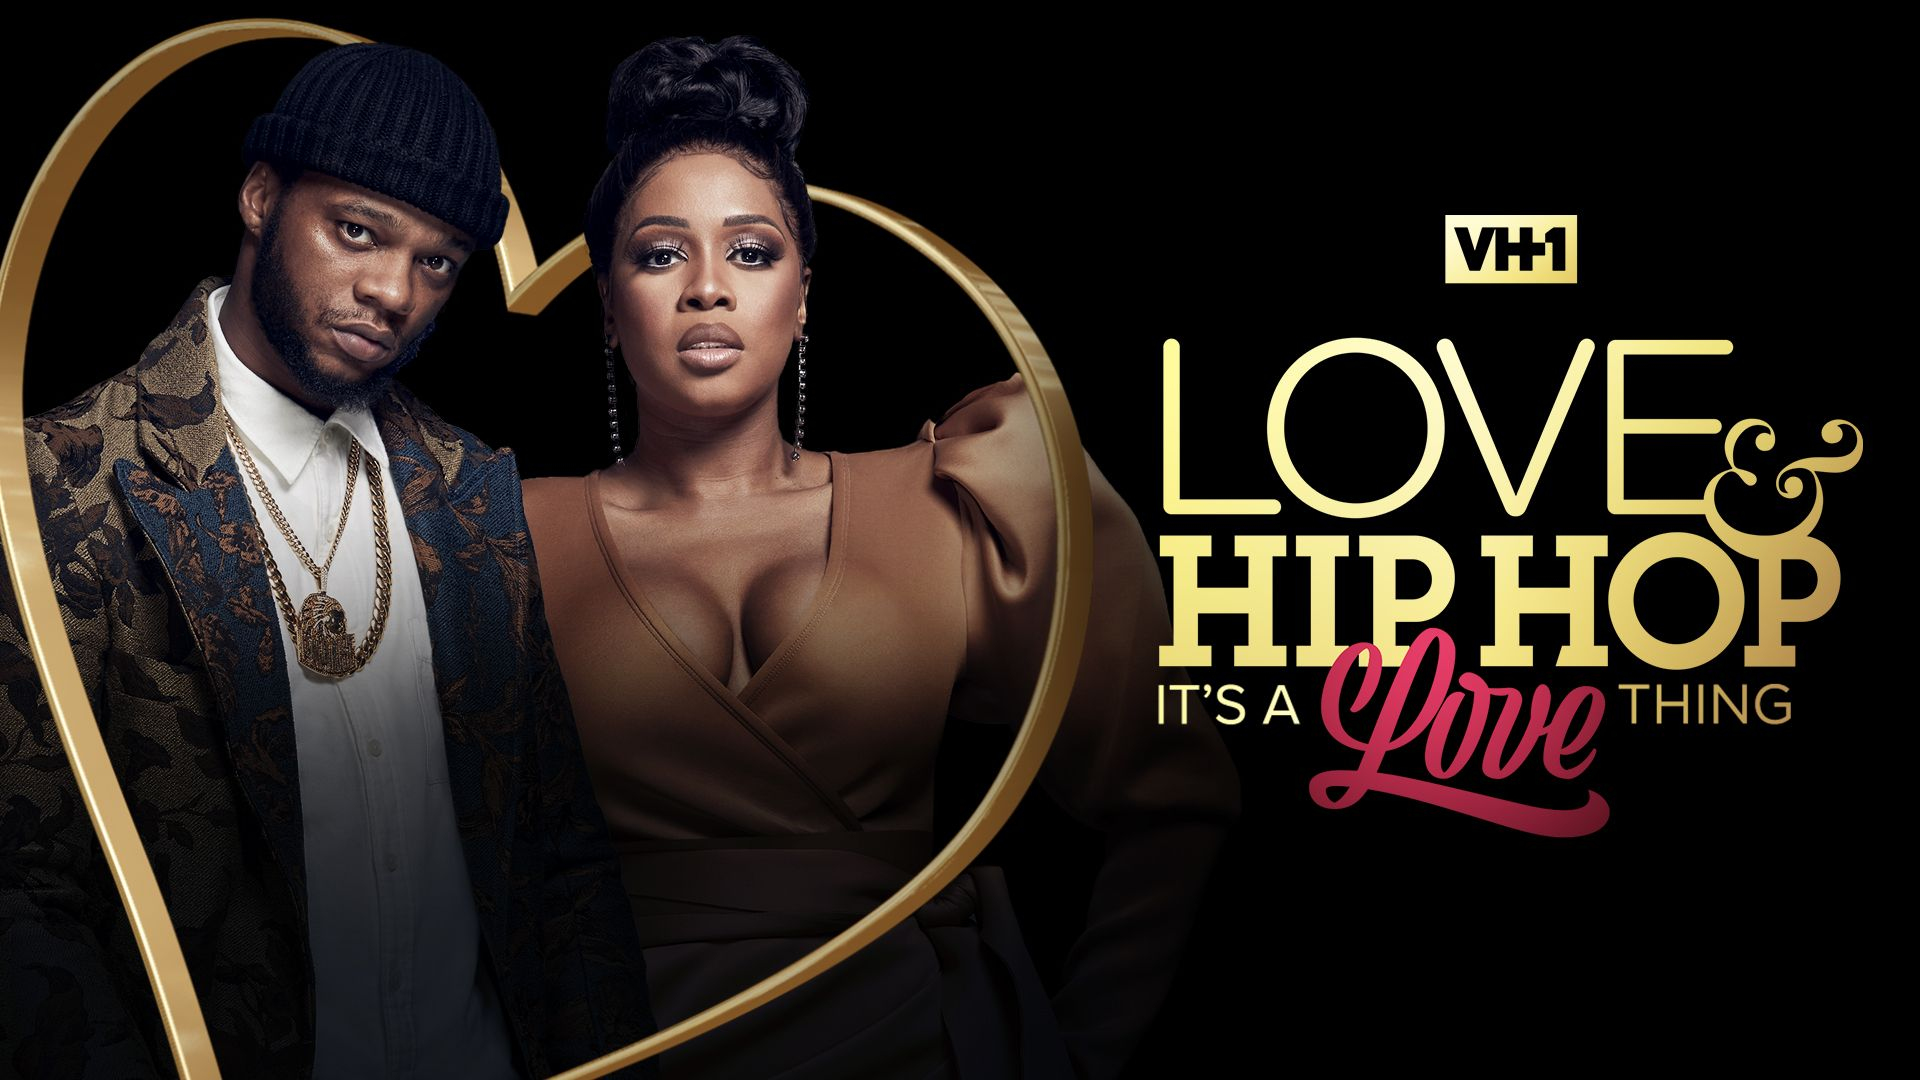 Love & Hip Hop It's a Love Thing (TV Series 2021 Now)